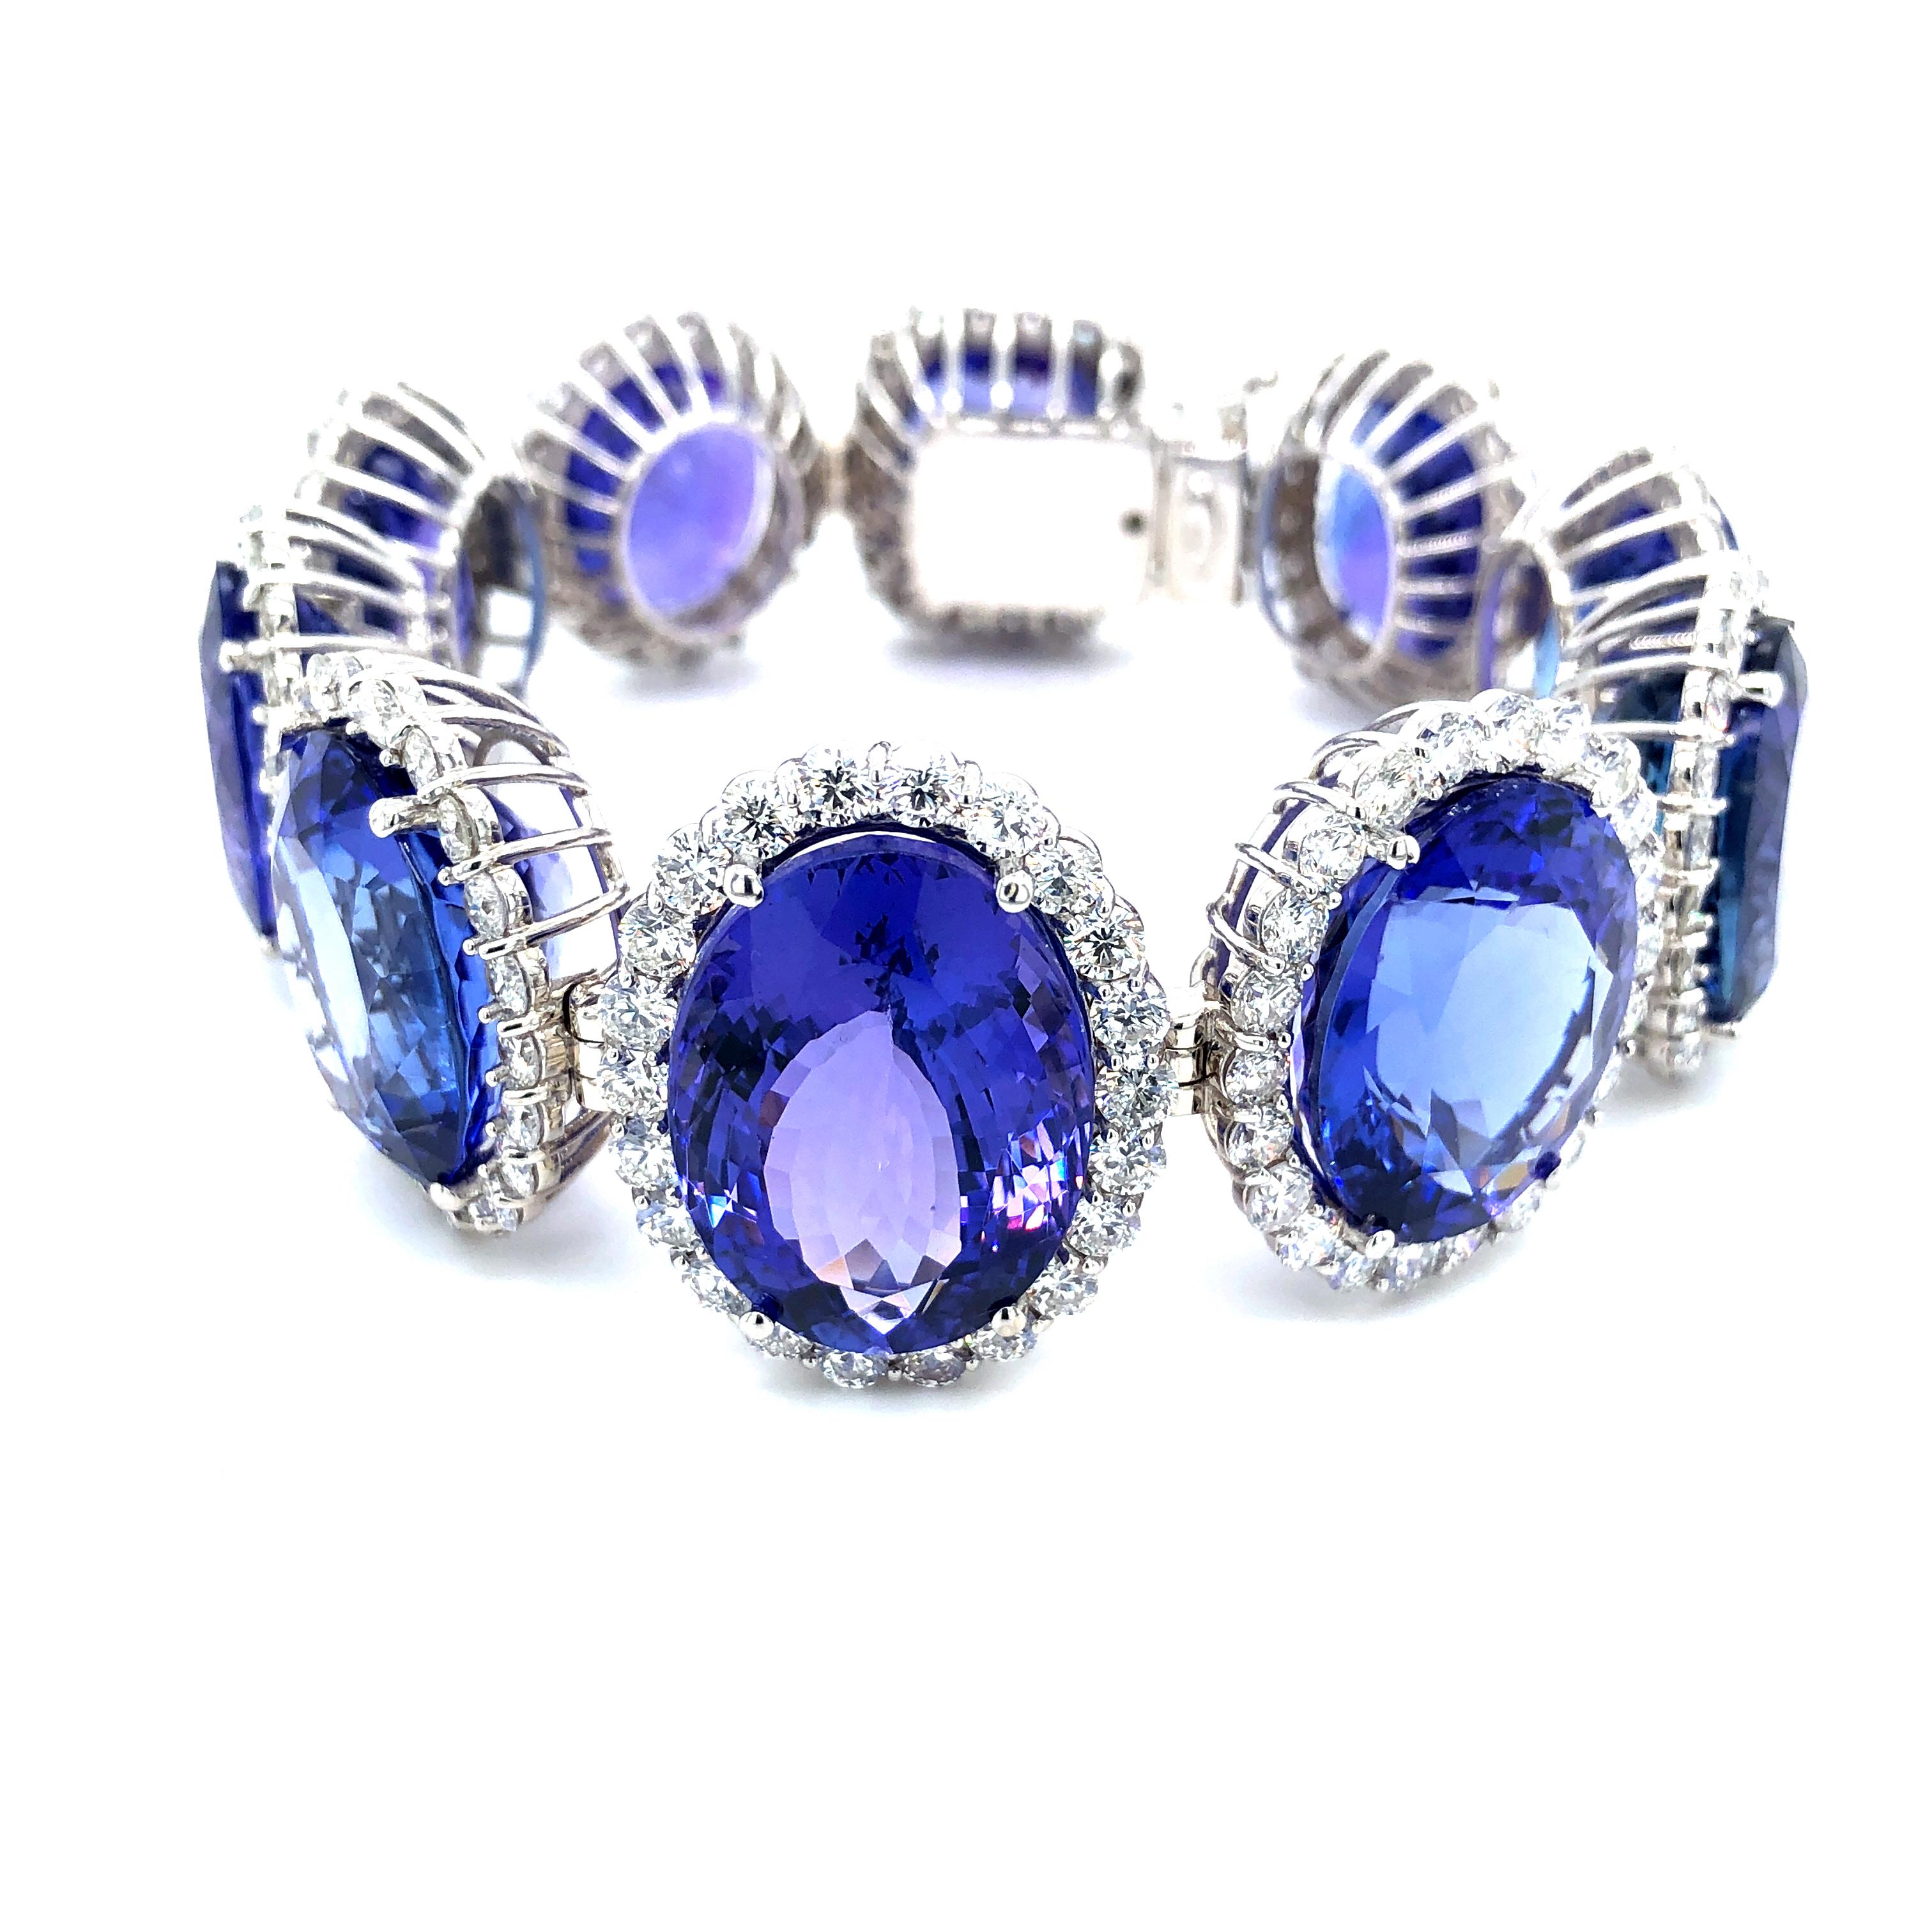 Offered here is a Kozi Collection in-house made tanzanite and diamond bracelet set in 18kt white gold. The bracelet consist of ten ( 10 ) natural tanzanite with halo brilliant cut diamonds around it. Every link was carefully measured for each